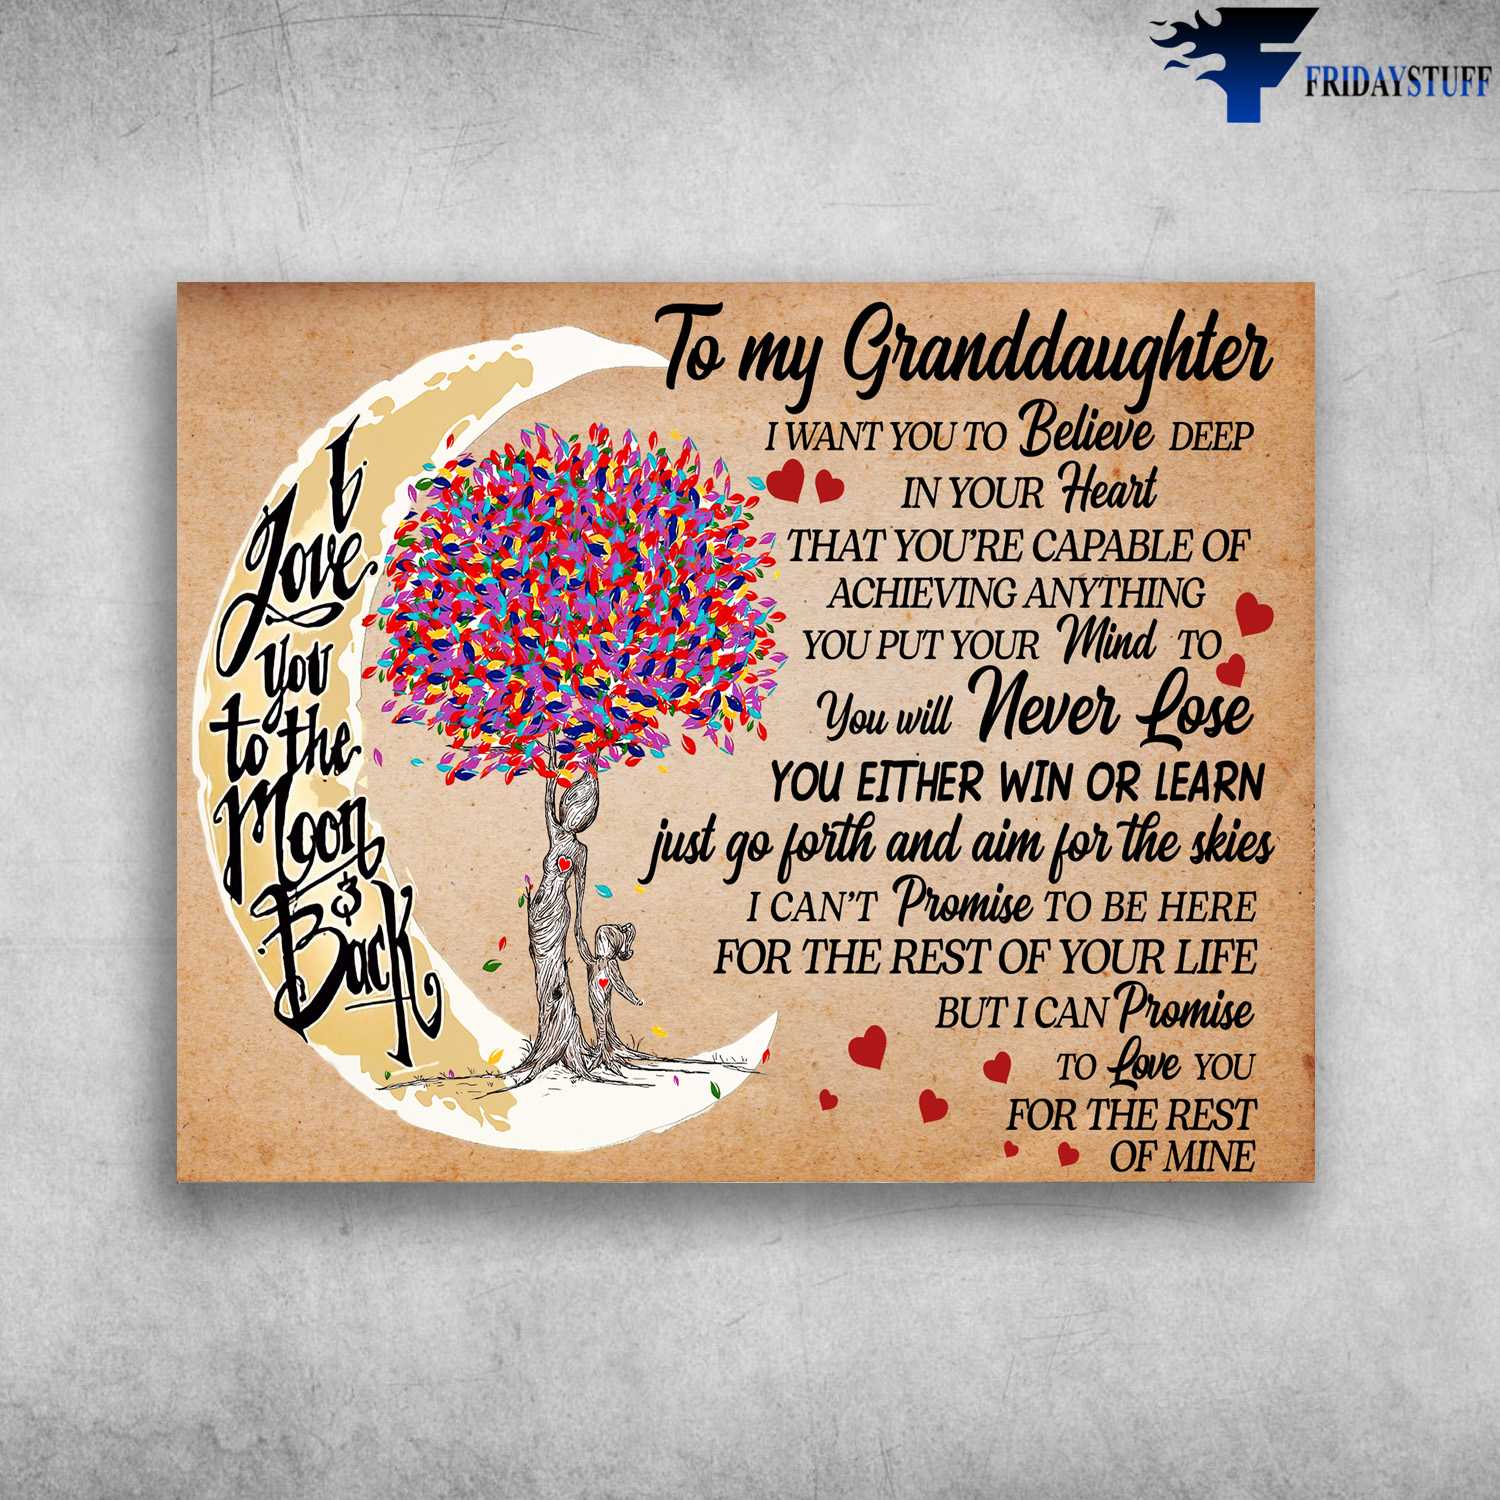 Granddaughter Gift, I love You To The Moon And Back, I Want You To Believe, Deep In Your Heart, That You're Capable Of Achieving Anything, You Put Your Mind To